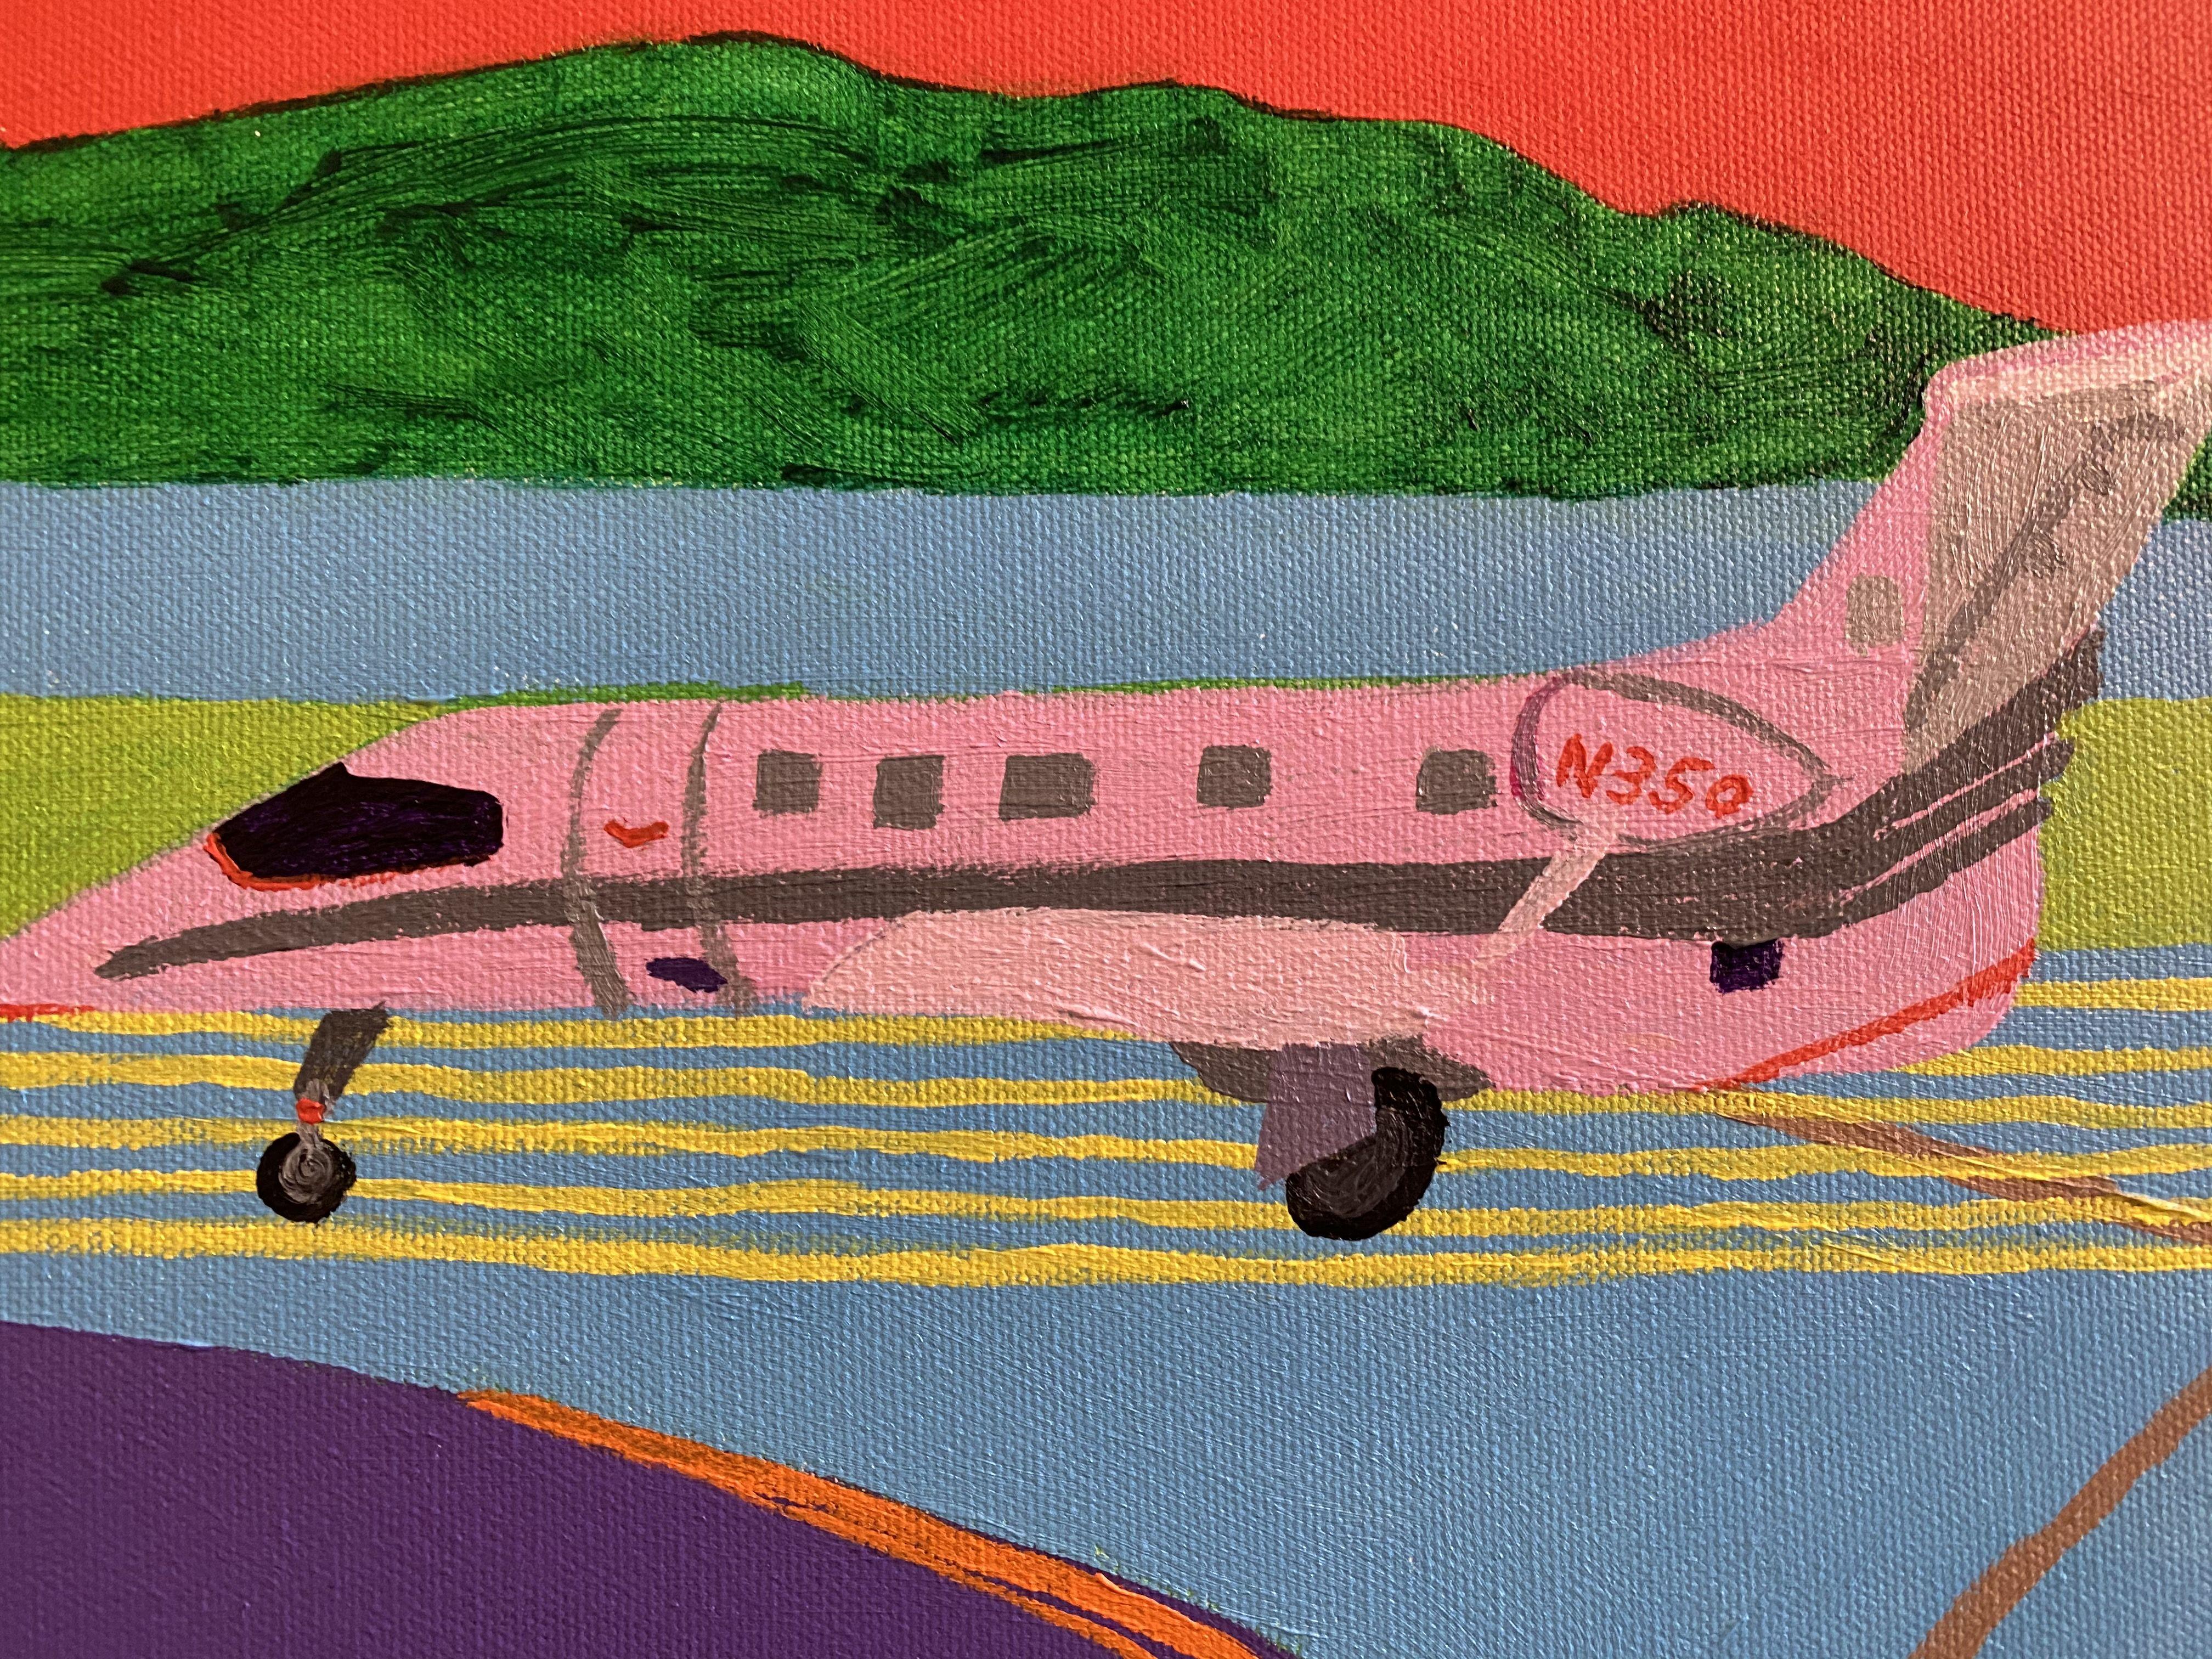 An airport landscape depicting the wait for takeoff sitting on the runway with a private jet also waiting its turn.  This acrylic painting was created with intense blues, pink, yellow, green purple and red on stretched canvas. It is unframed, the